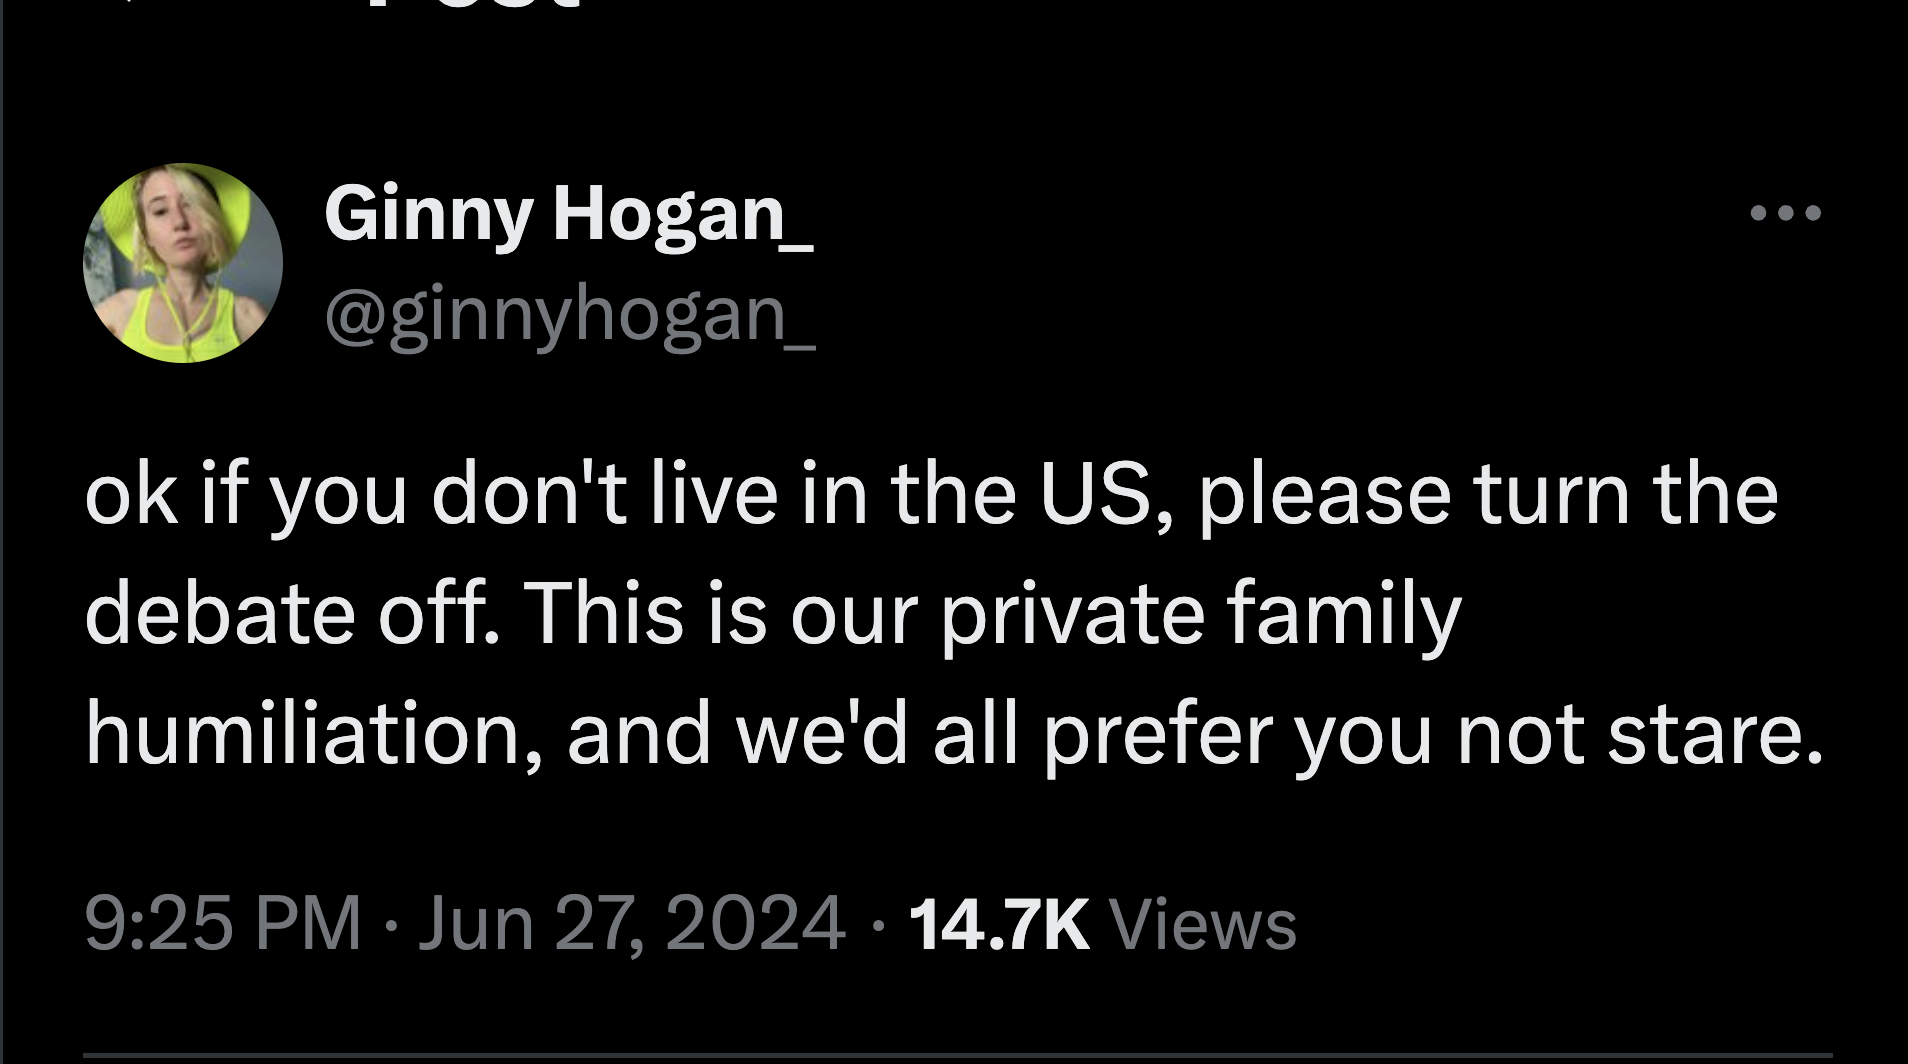 screenshot - Ginny Hogan_ ok if you don't live in the Us, please turn the debate off. This is our private family humiliation, and we'd all prefer you not stare. Views